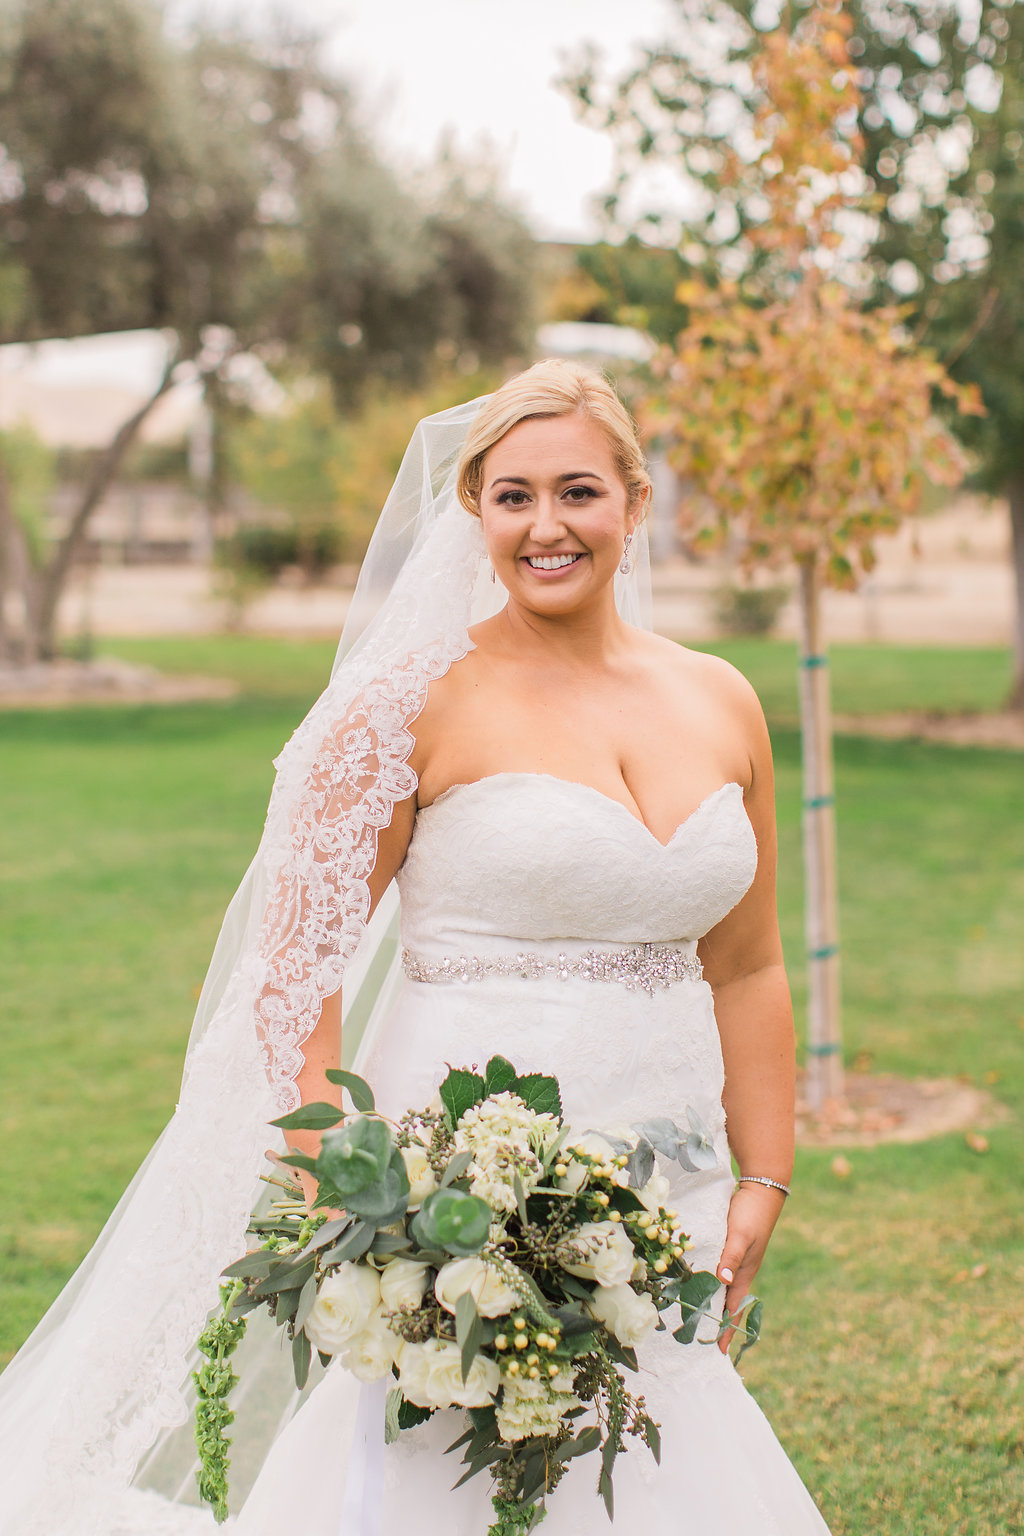 Jacques Ranch Fall Wedding — The Overwhelmed Bride Wedding Blog